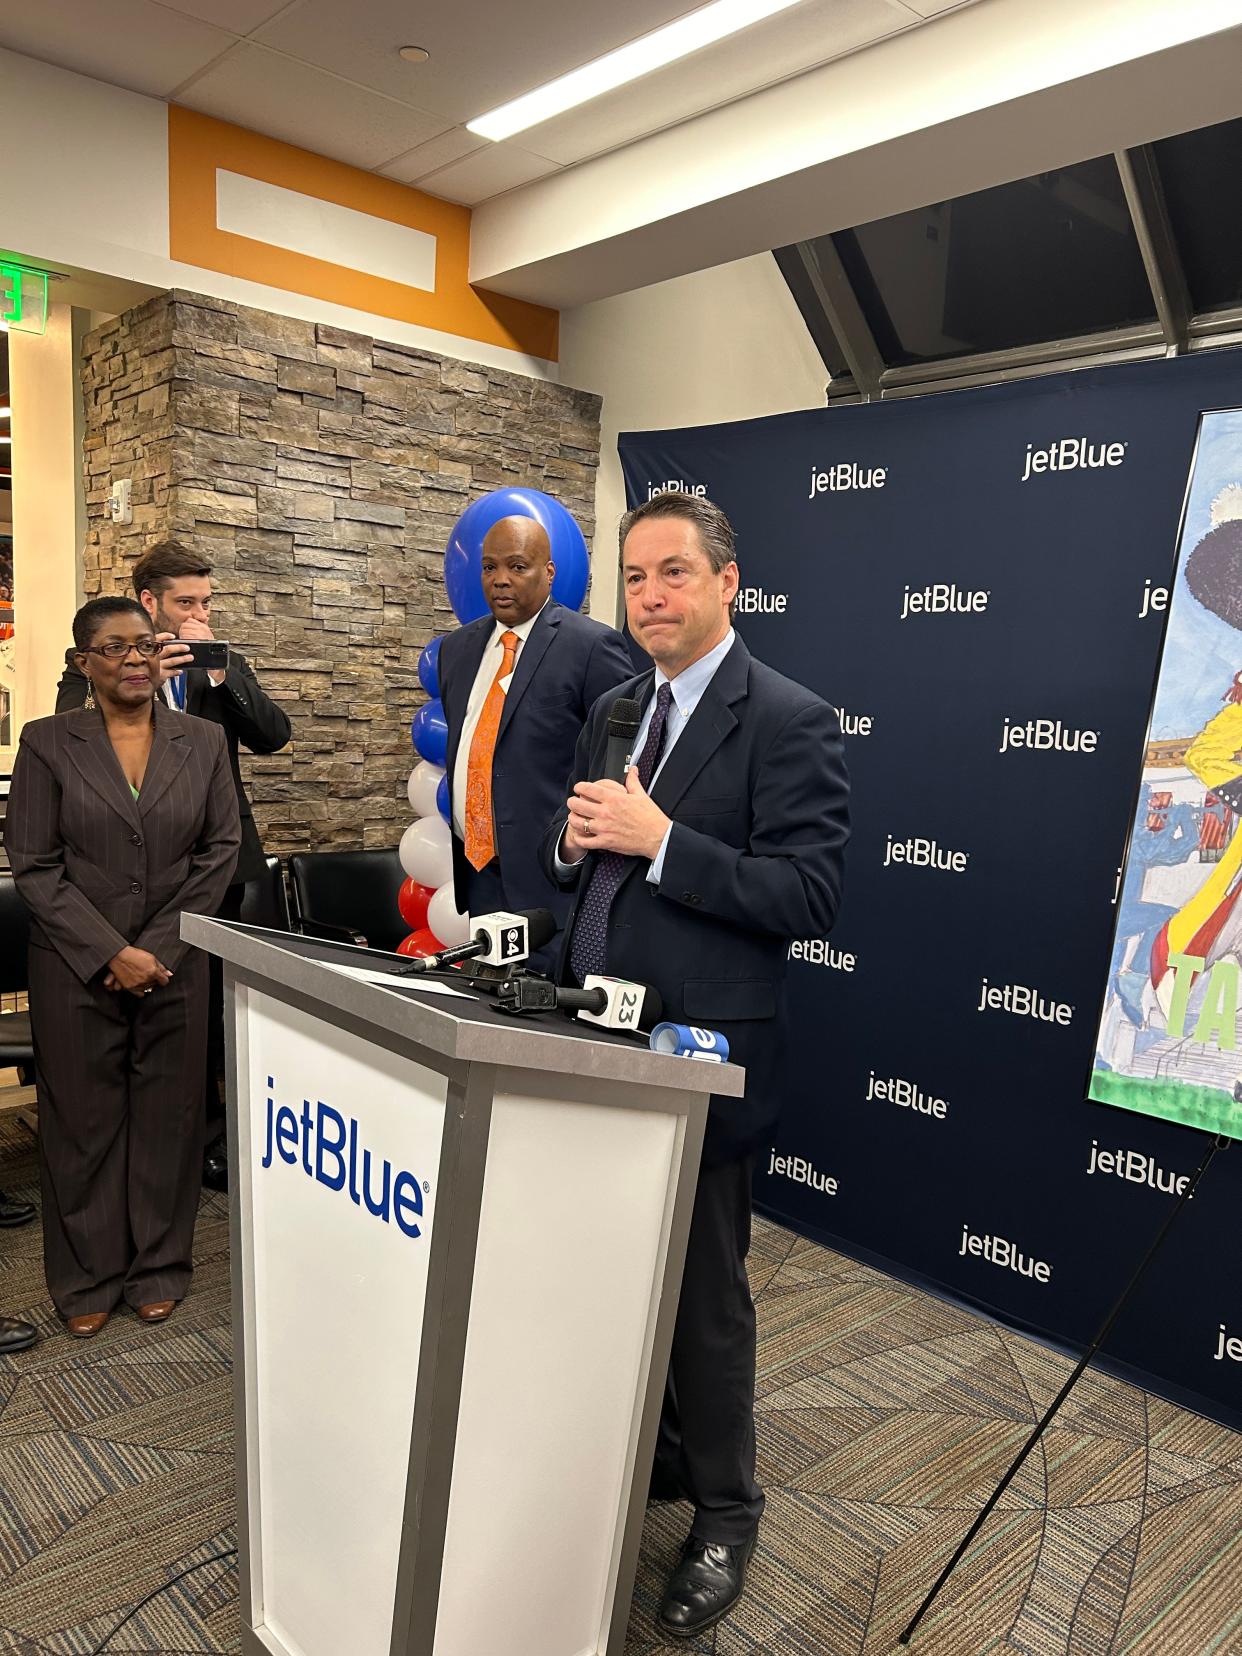 JetBlue General counsel Robert Land announces $49-one-way flights between Fort Lauderdale and Tallahassee. The inaugural flight was Jan. 4.